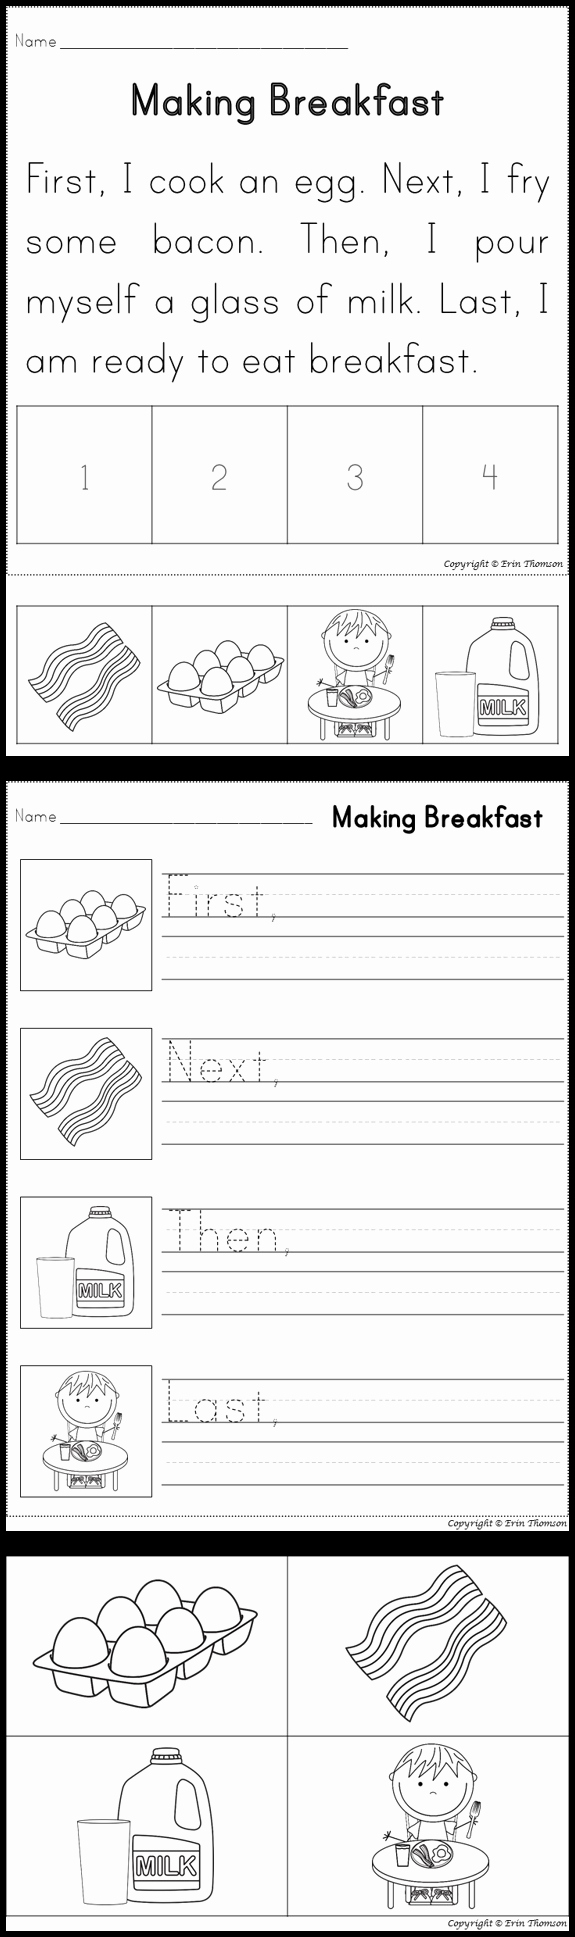 Story Sequencing Worksheets for Kindergarten New Sequencing Story First Next then Last with Pictures